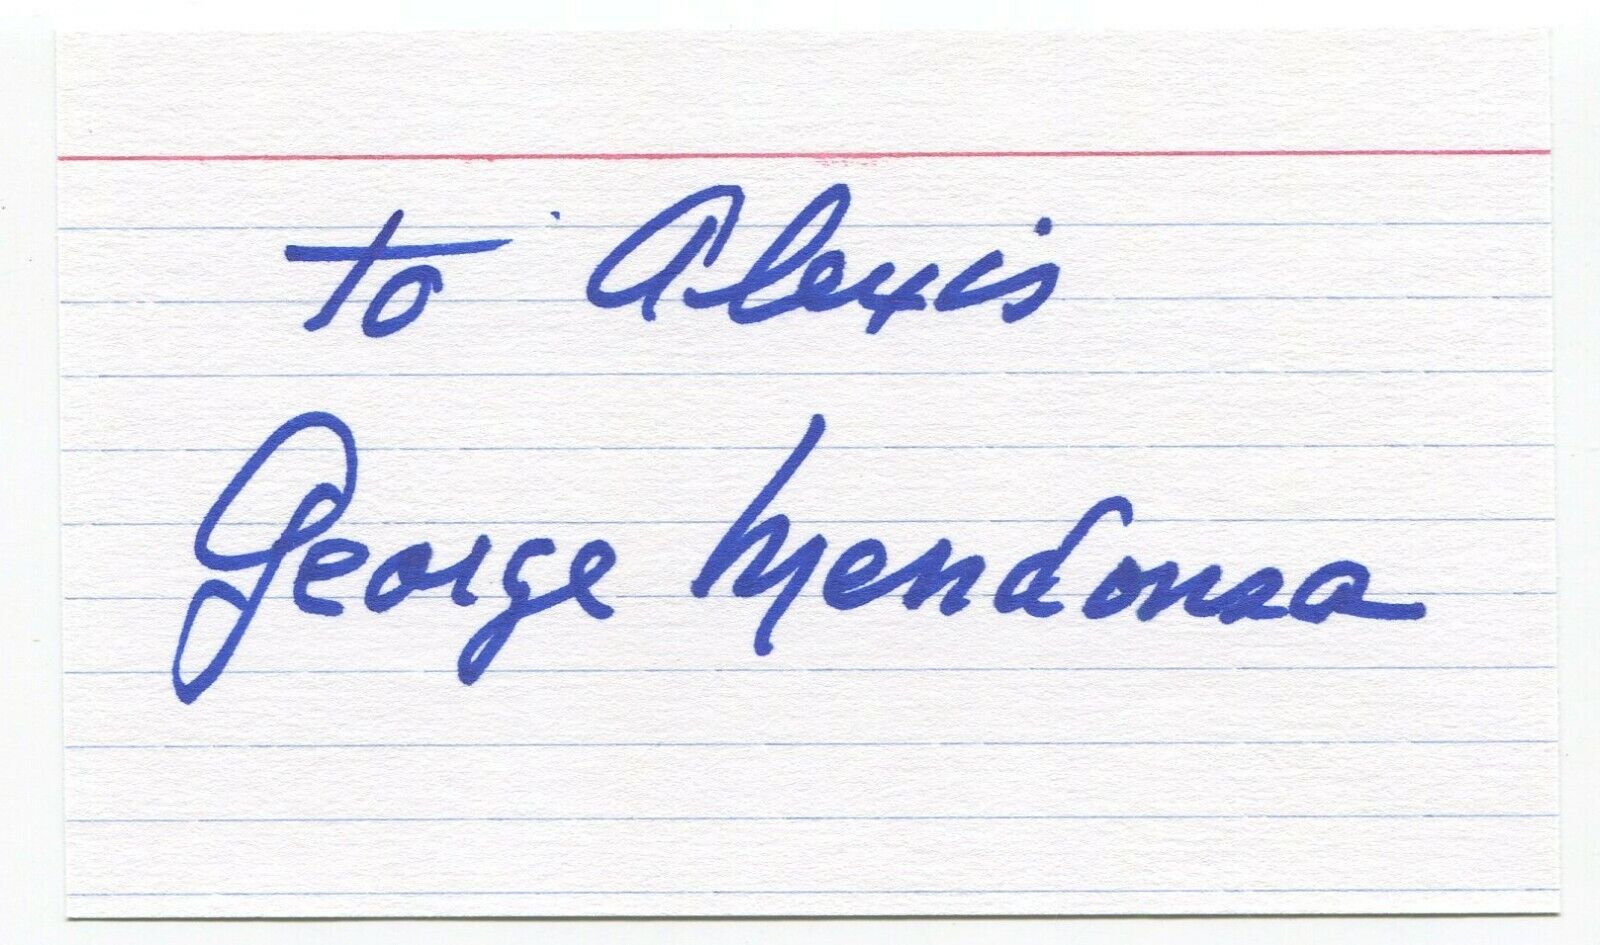 George Mendonsa Signed 3x5 Index Card Autographed Signature VJ Day Sailor Kiss